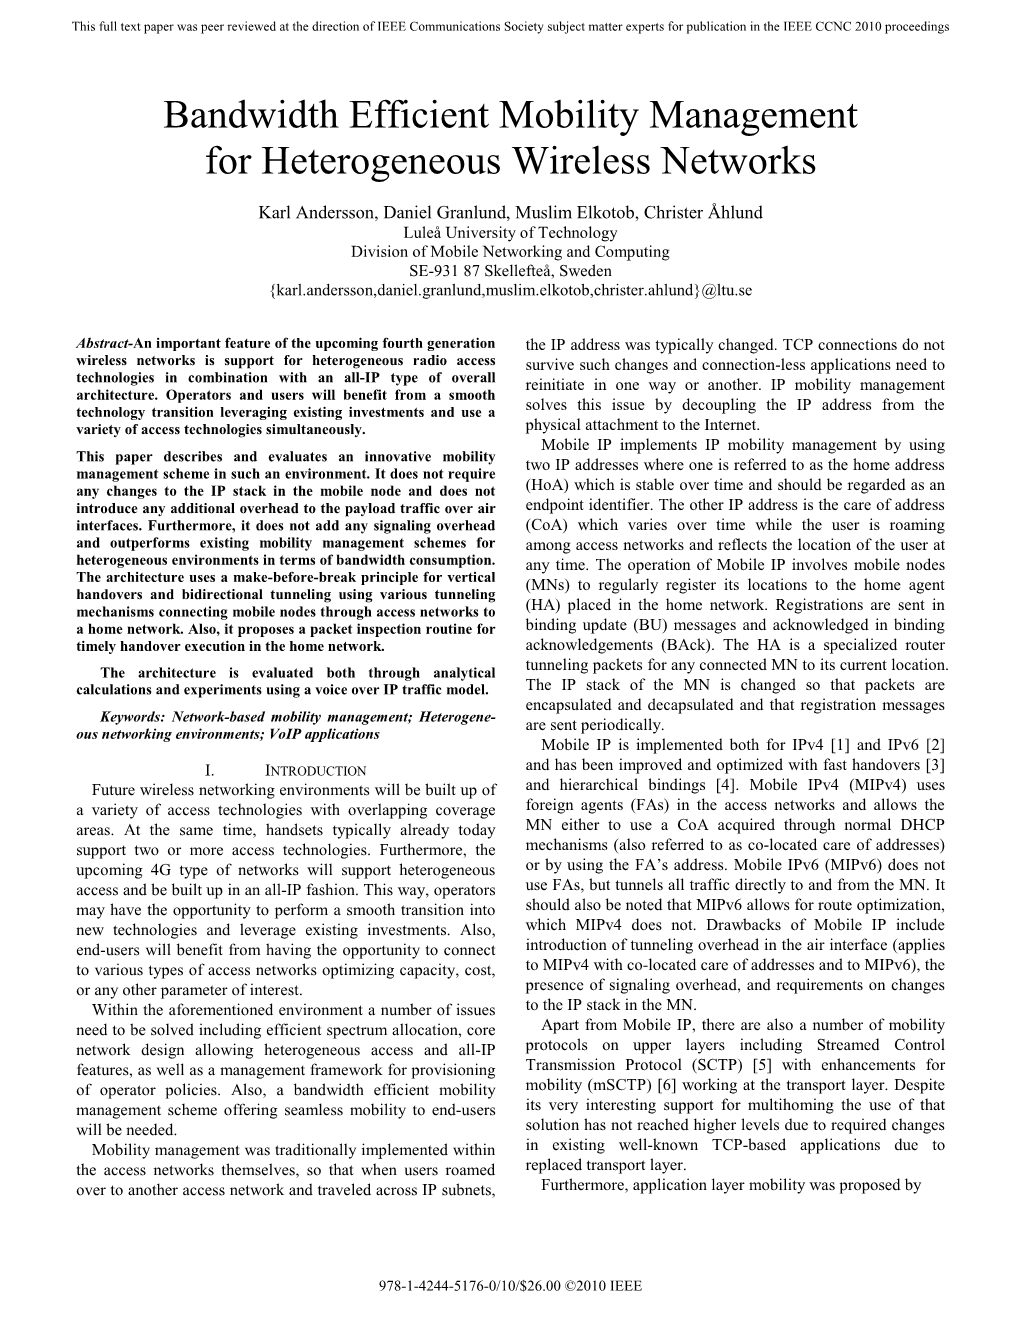 Bandwidth Efficient Mobility Management for Heterogeneous Wireless Networks